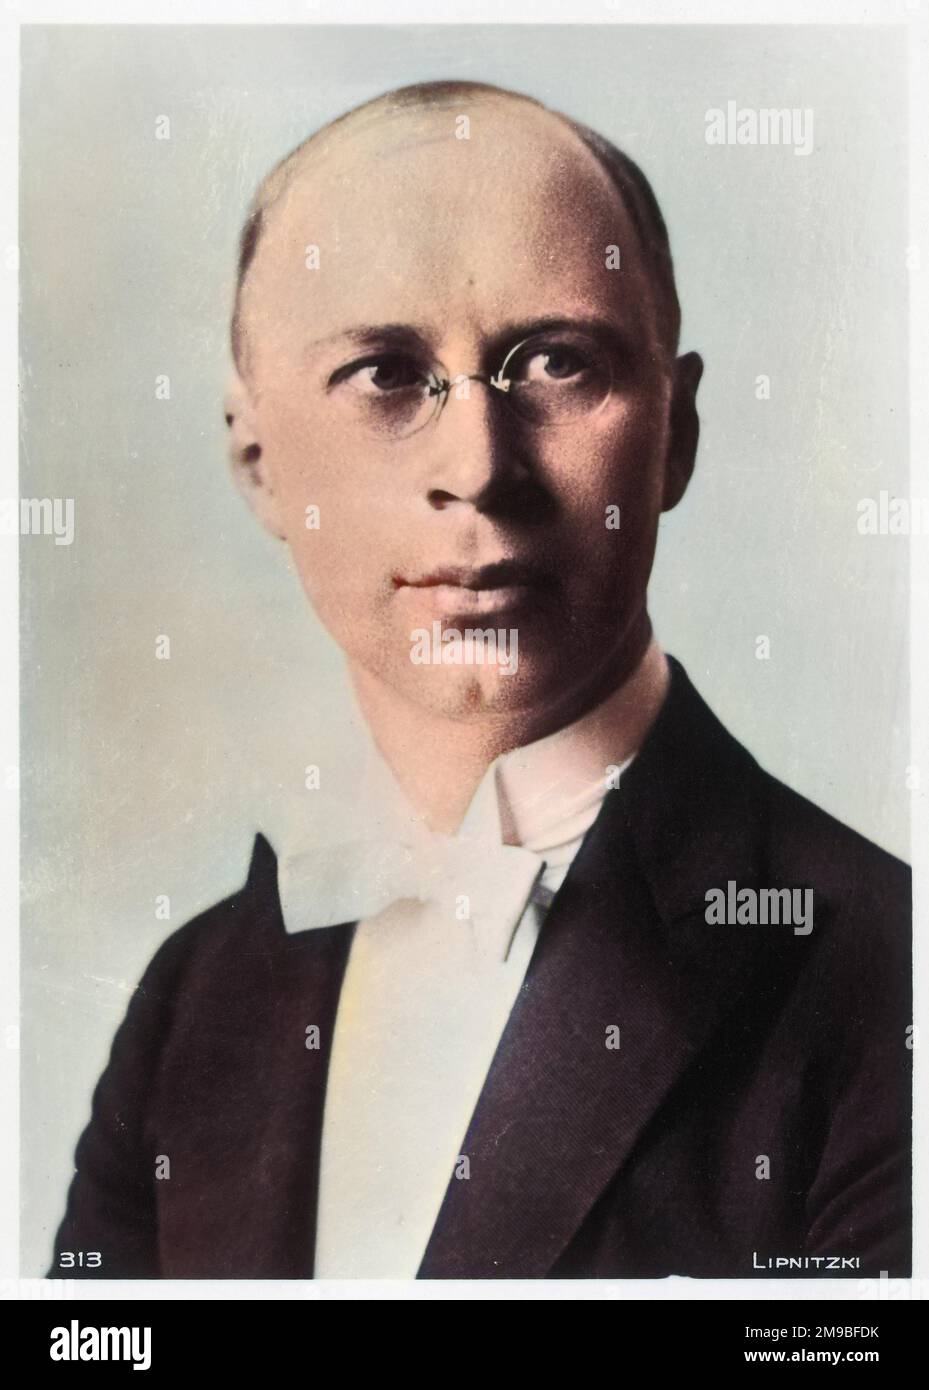 Sergei Sergeyevich Prokofiev (1891 - 1953), Russian pianist and composer, in evening dress. Stock Photo